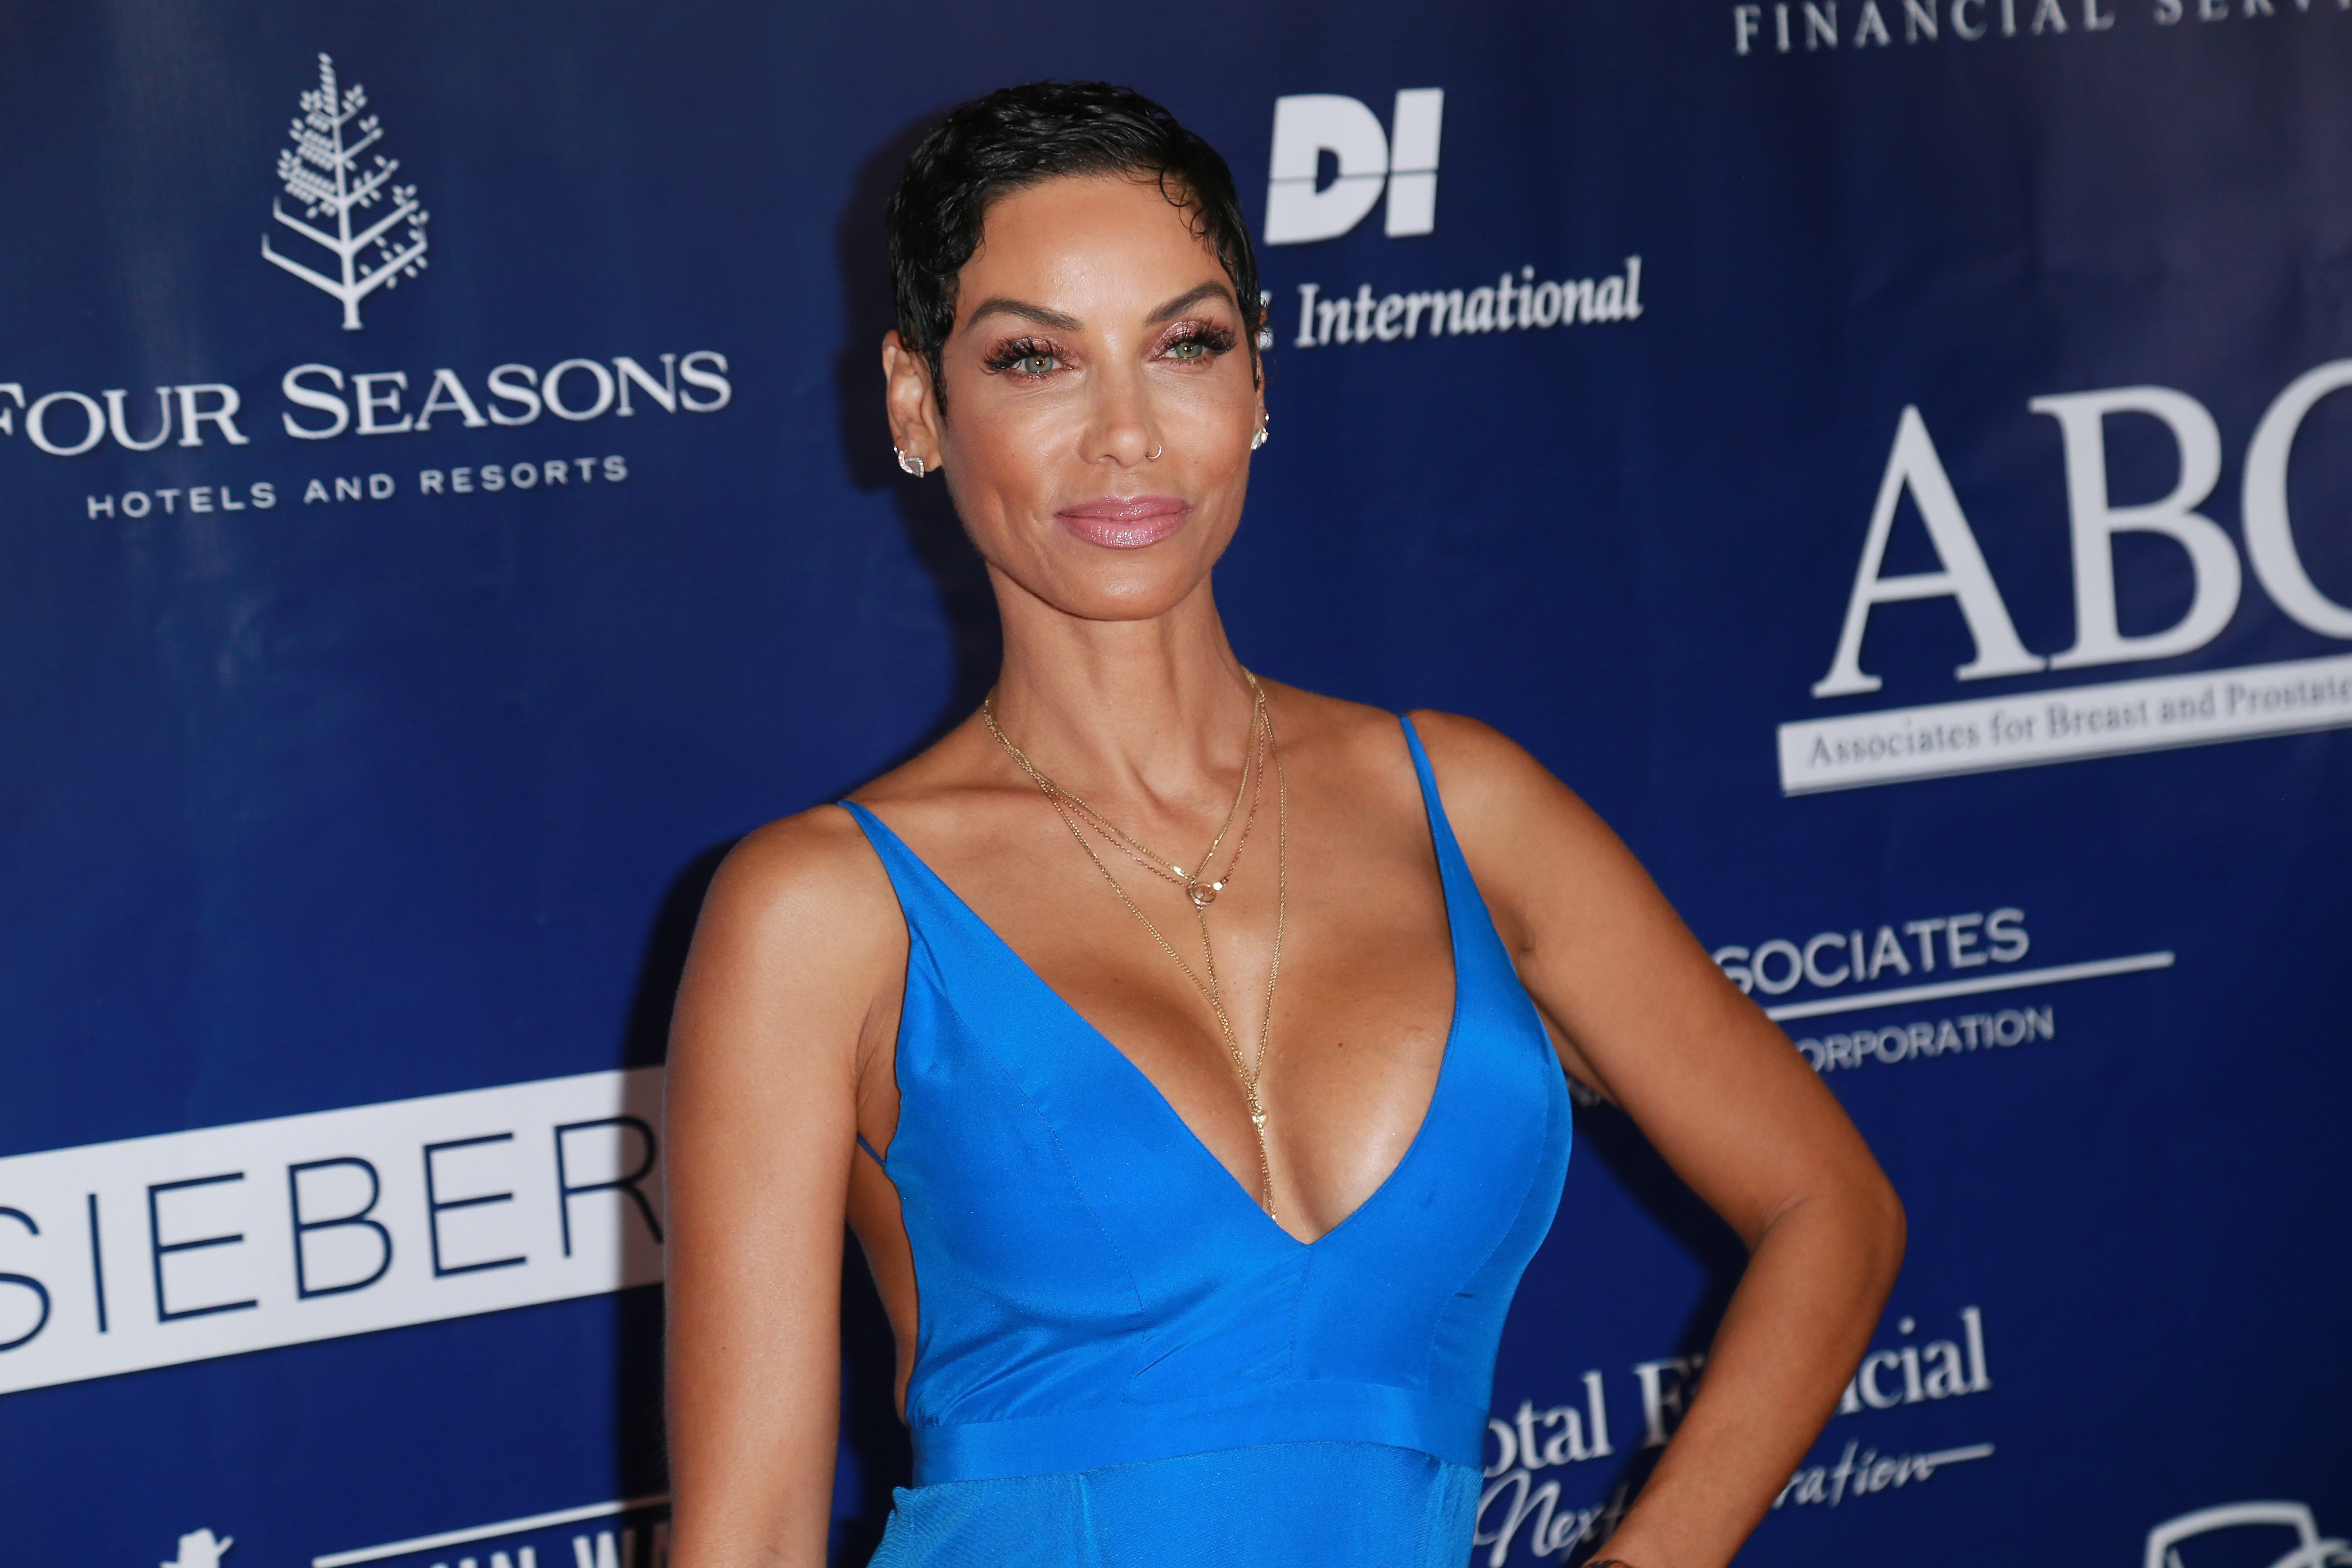 Nicole Mitchell Murphy attends the 28th Annual Talk Of The Town Gala on November 18, 2017. | Photo: Getty Images